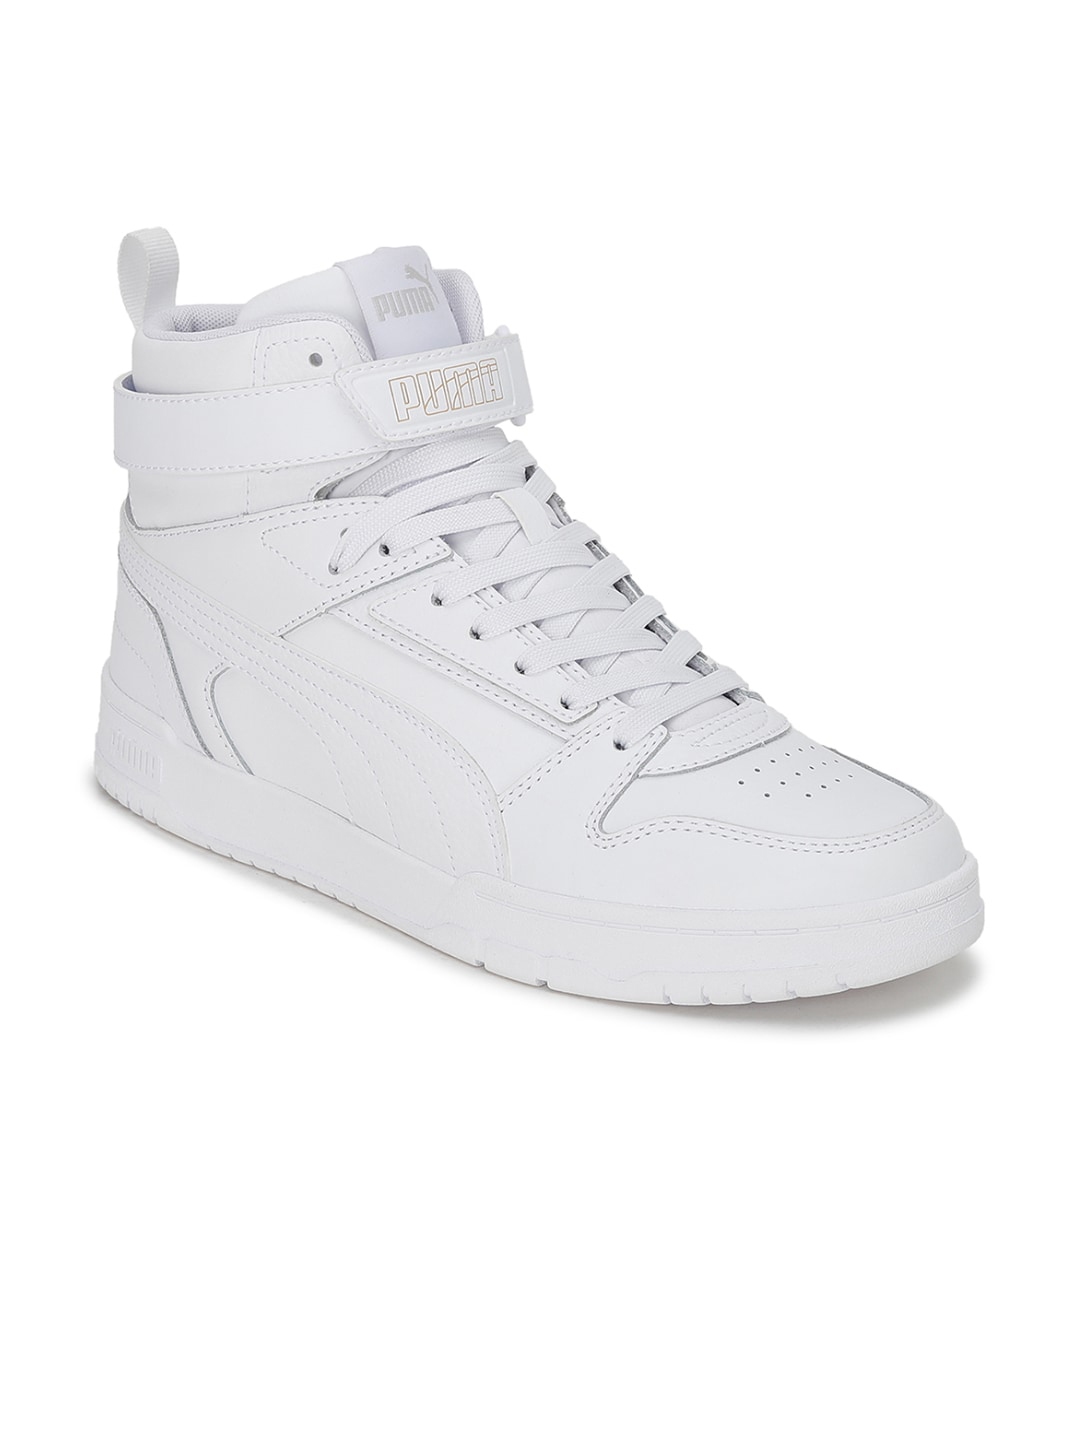 Buy Puma Unisex White RBD Game Sneakers - Casual Shoes for Unisex ...